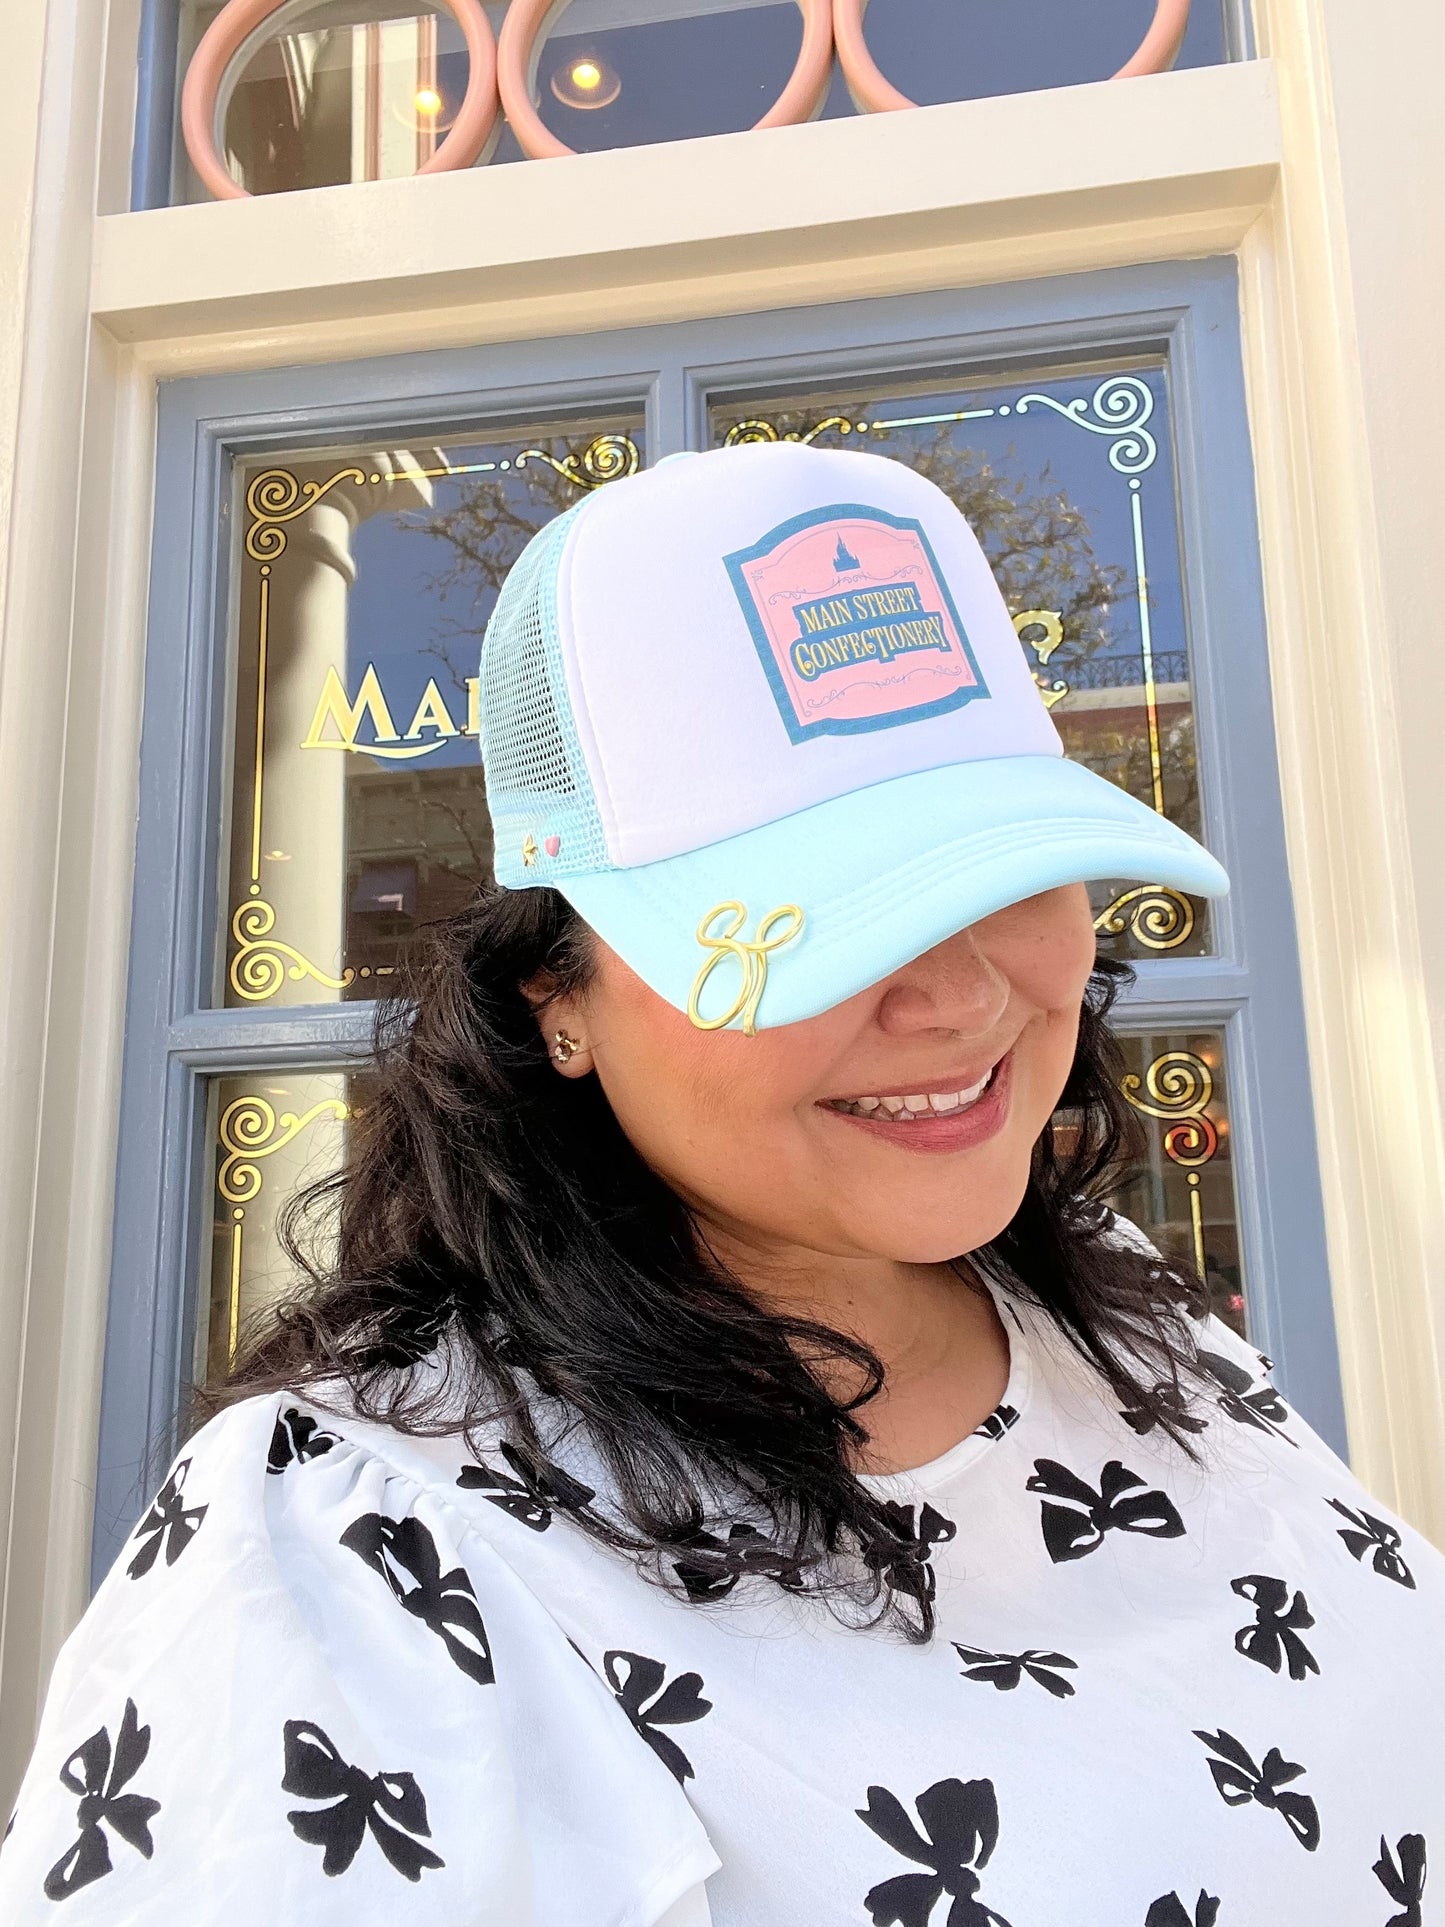 Main St Confectionery blue trucker hat